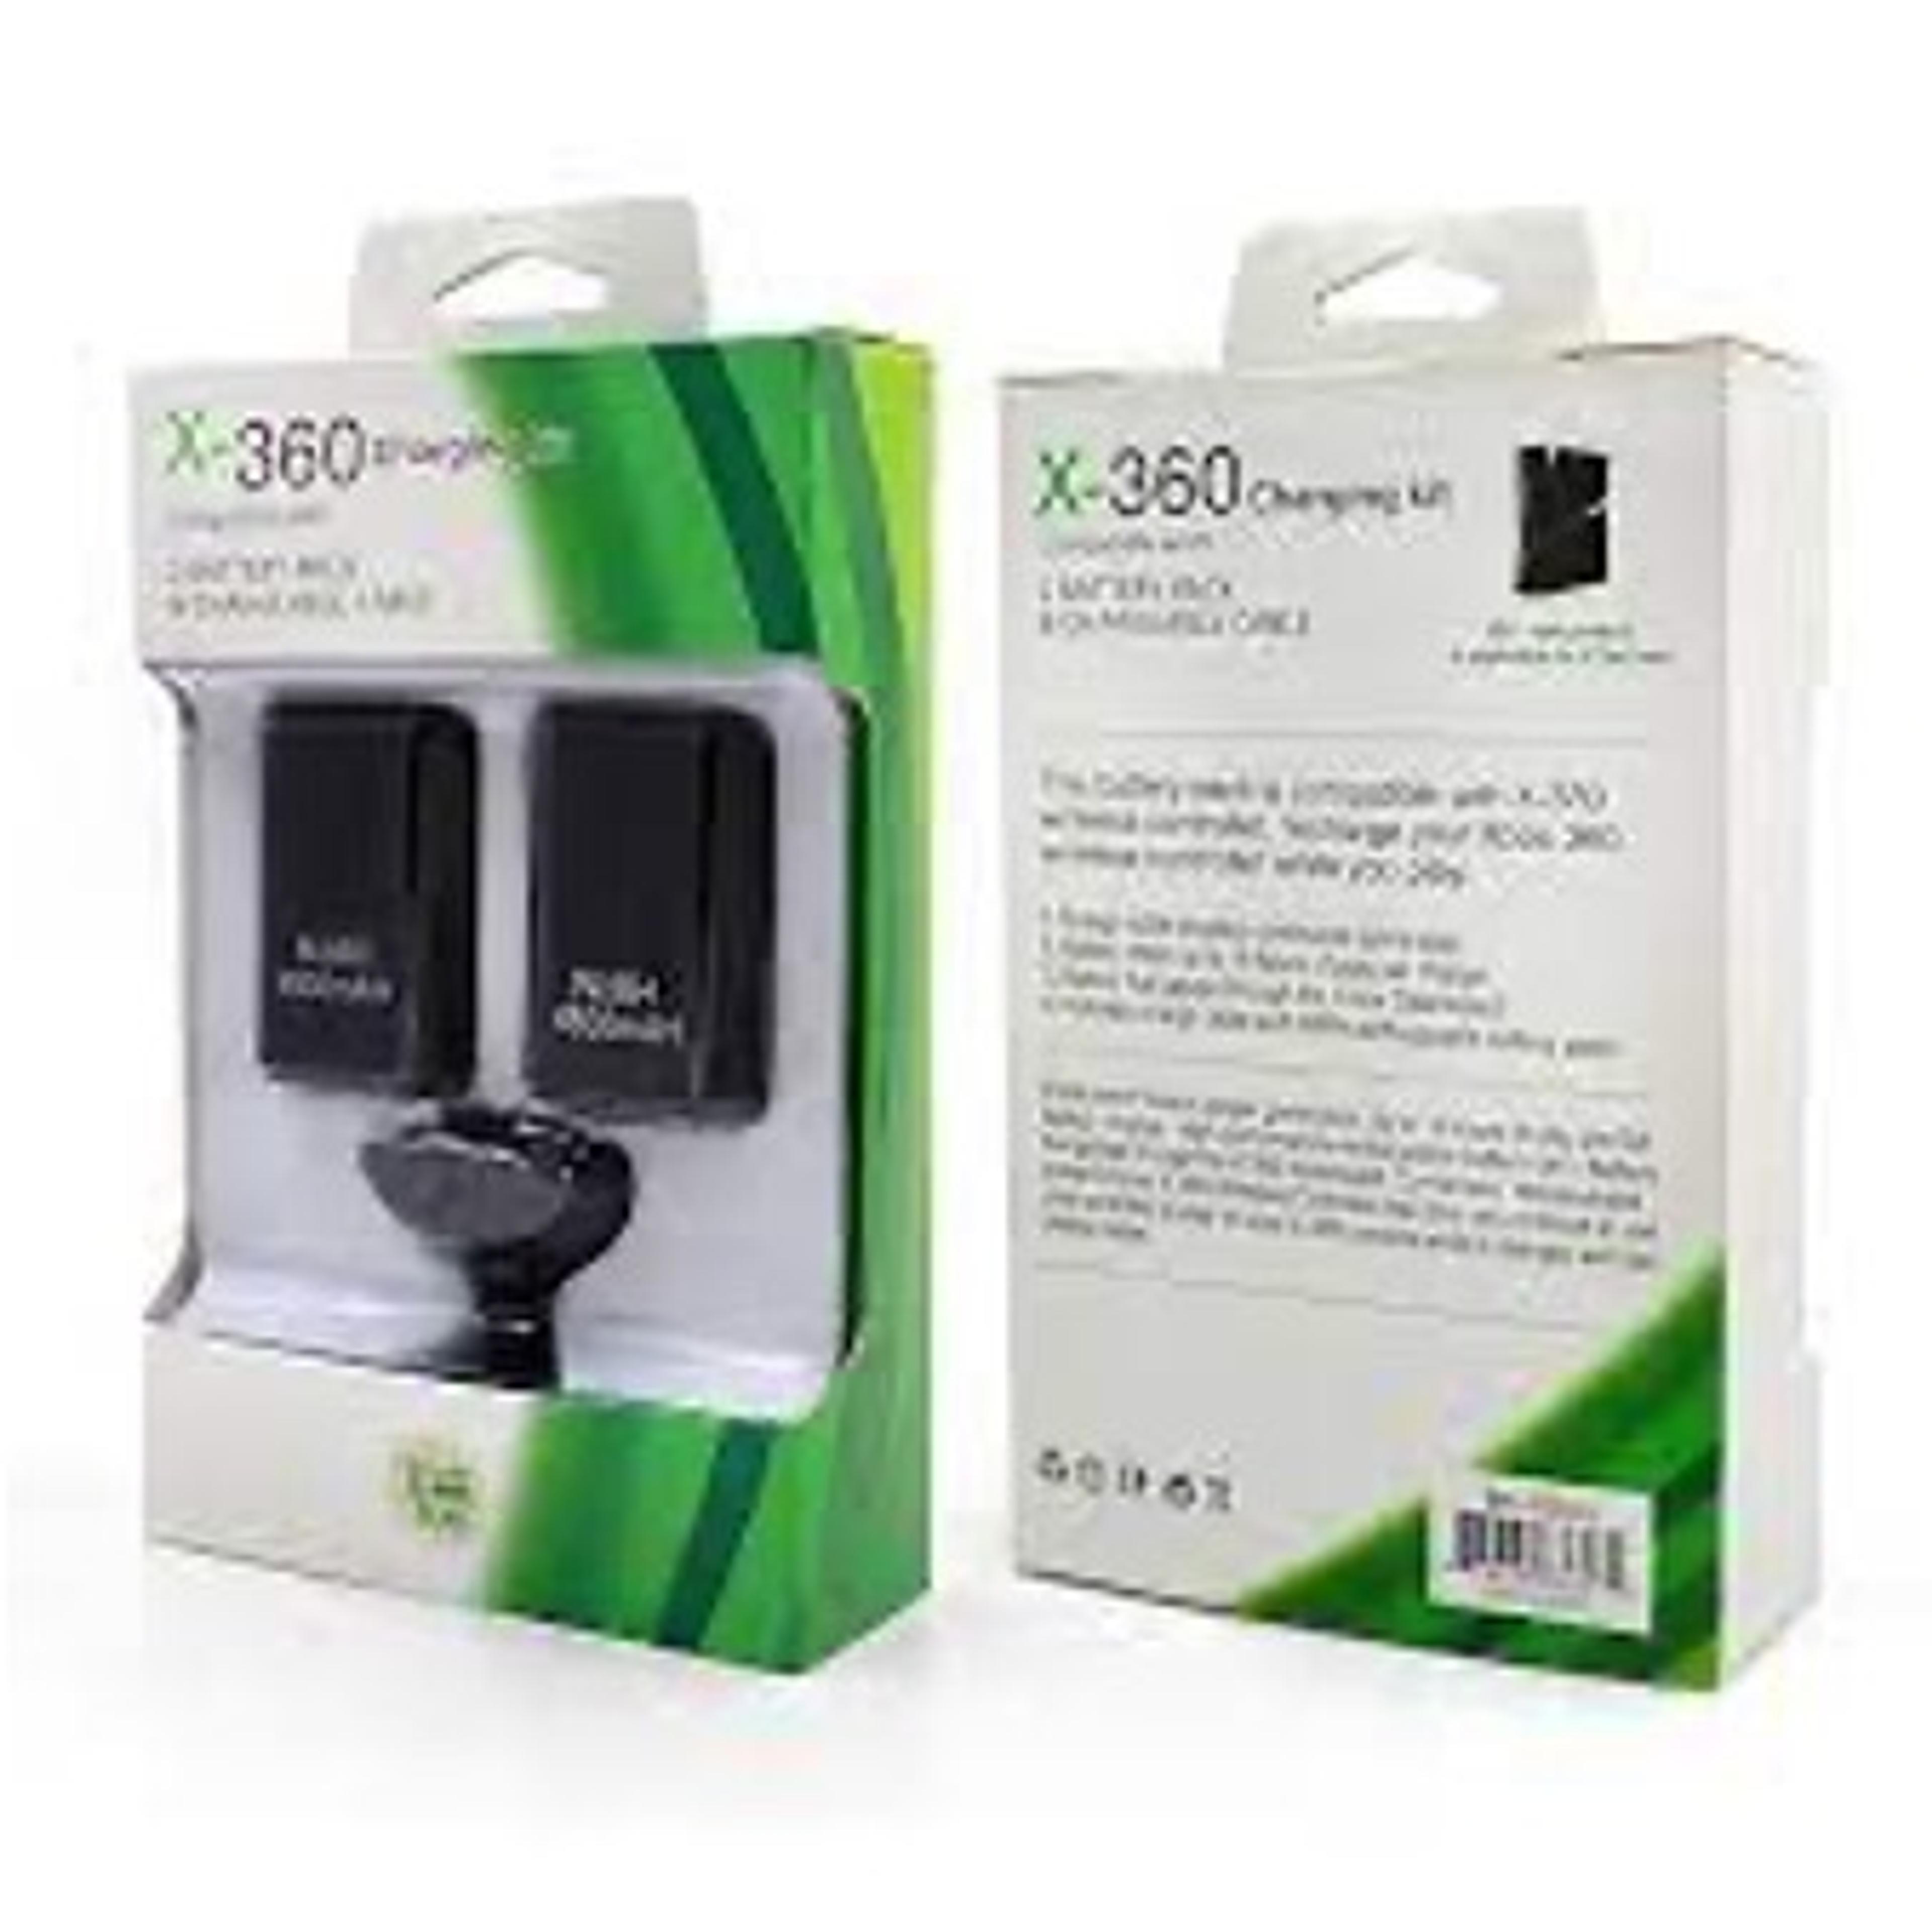 Xbox 360 Controller Chargers